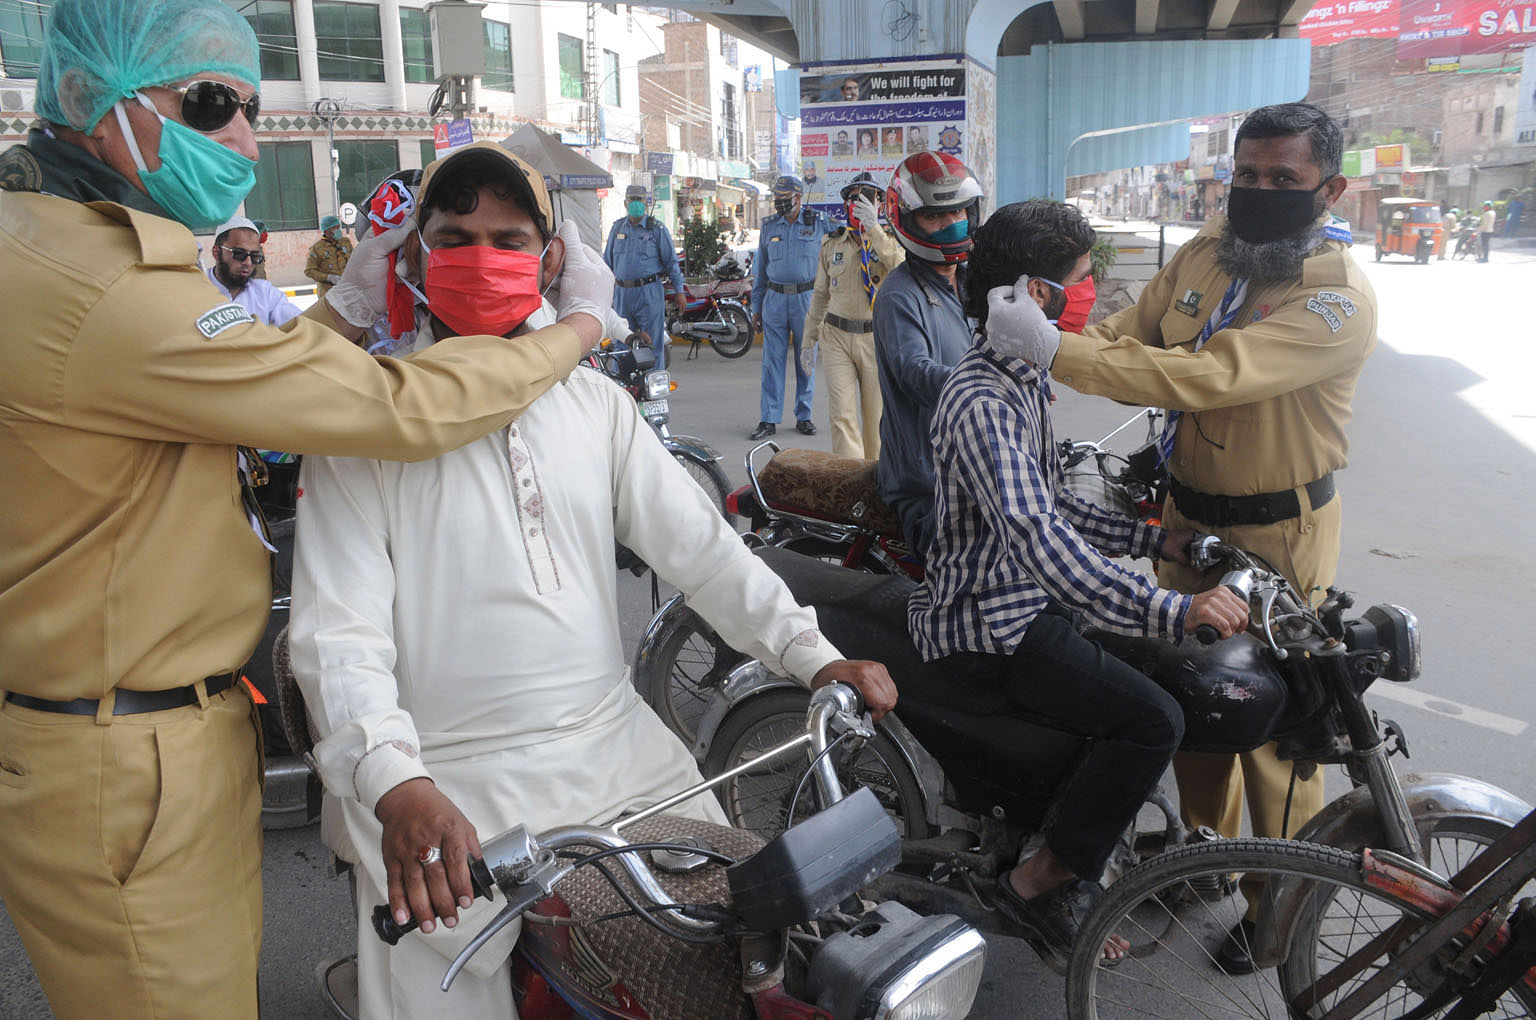 Volunteers distributing face masks to people during a partial lockdown in Multan, Pakistan, on Sunday. Public health infrastructure in India, Pakistan or any number of sub-Saharan African countries is already struggling to cope, even at this relative